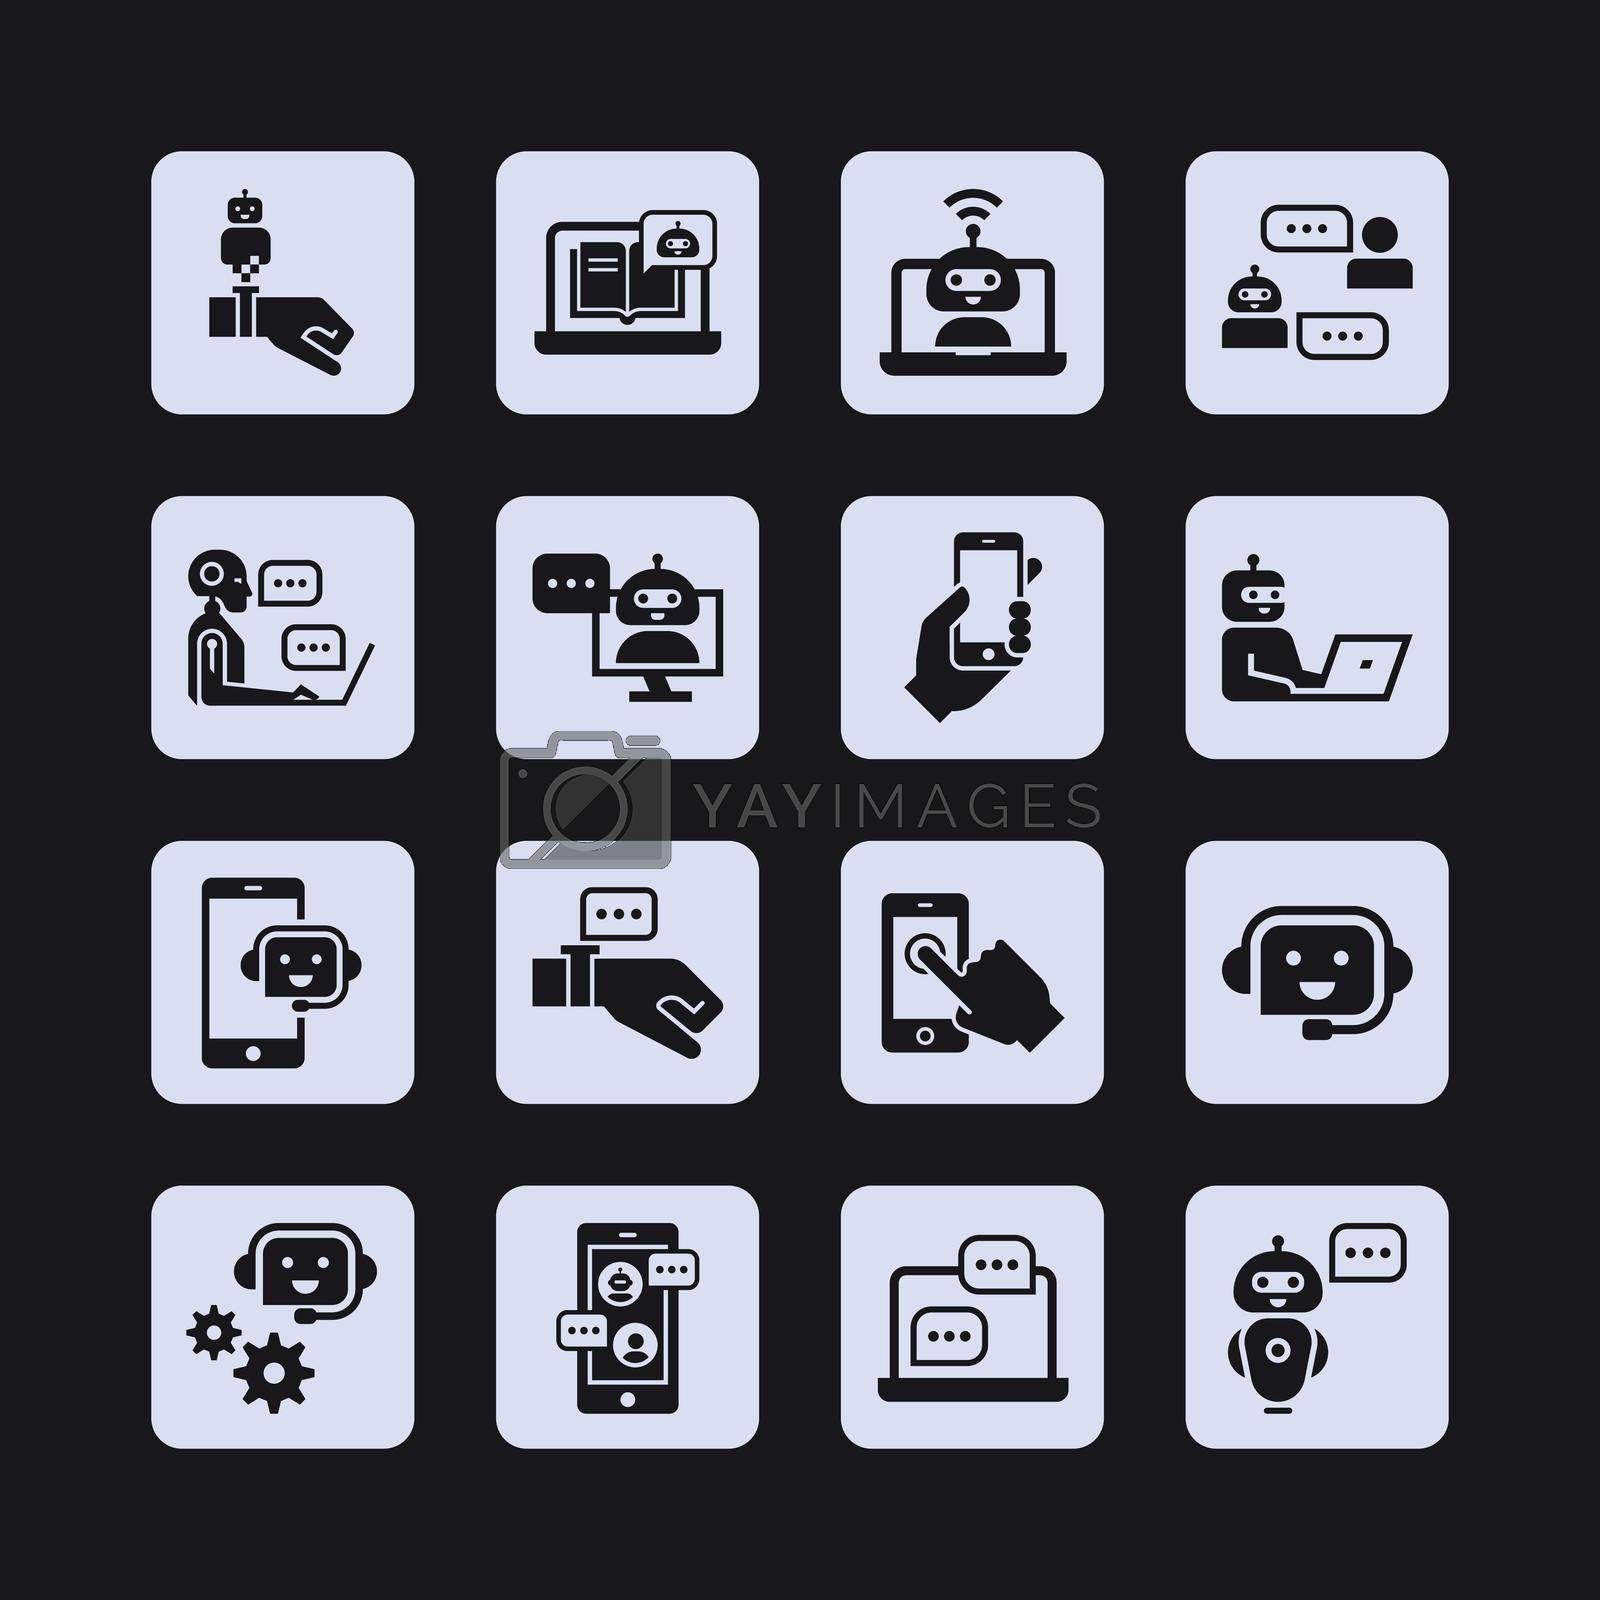 Communication smart technologies vector icon set in glyph style. Vector illustration